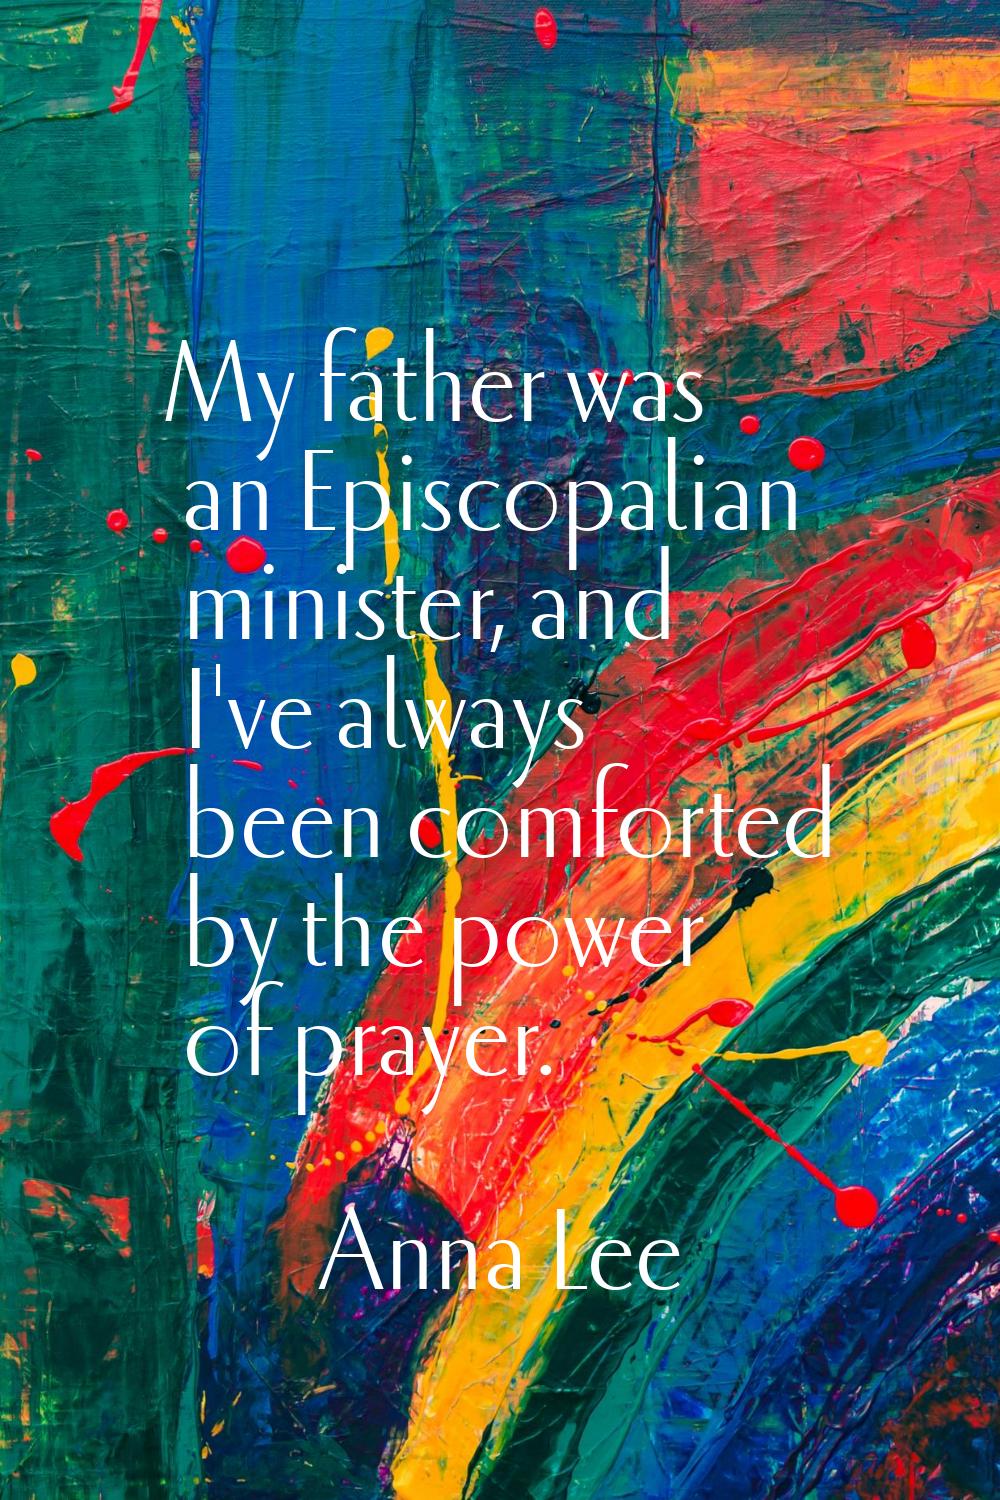 My father was an Episcopalian minister, and I've always been comforted by the power of prayer.